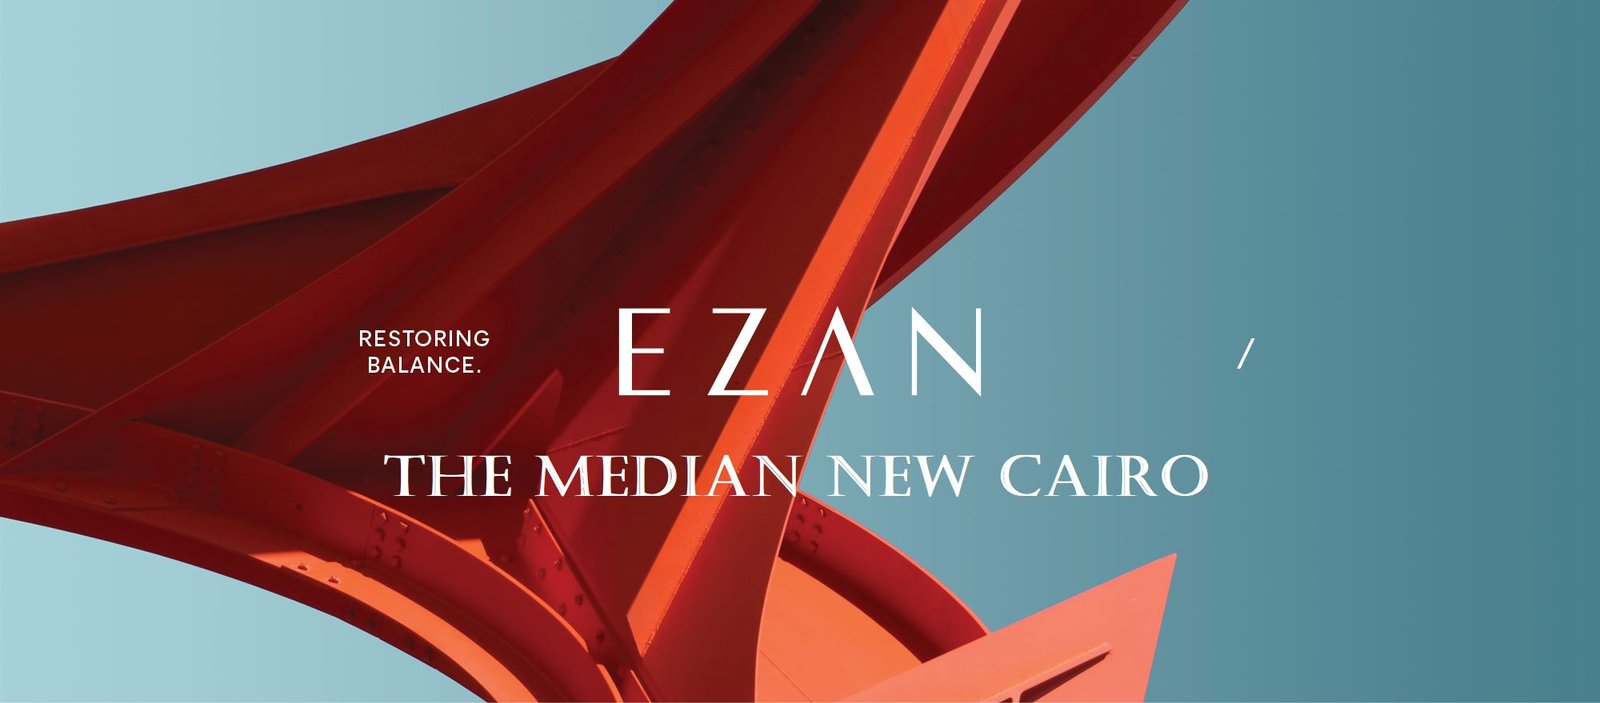 The Median New Cairo